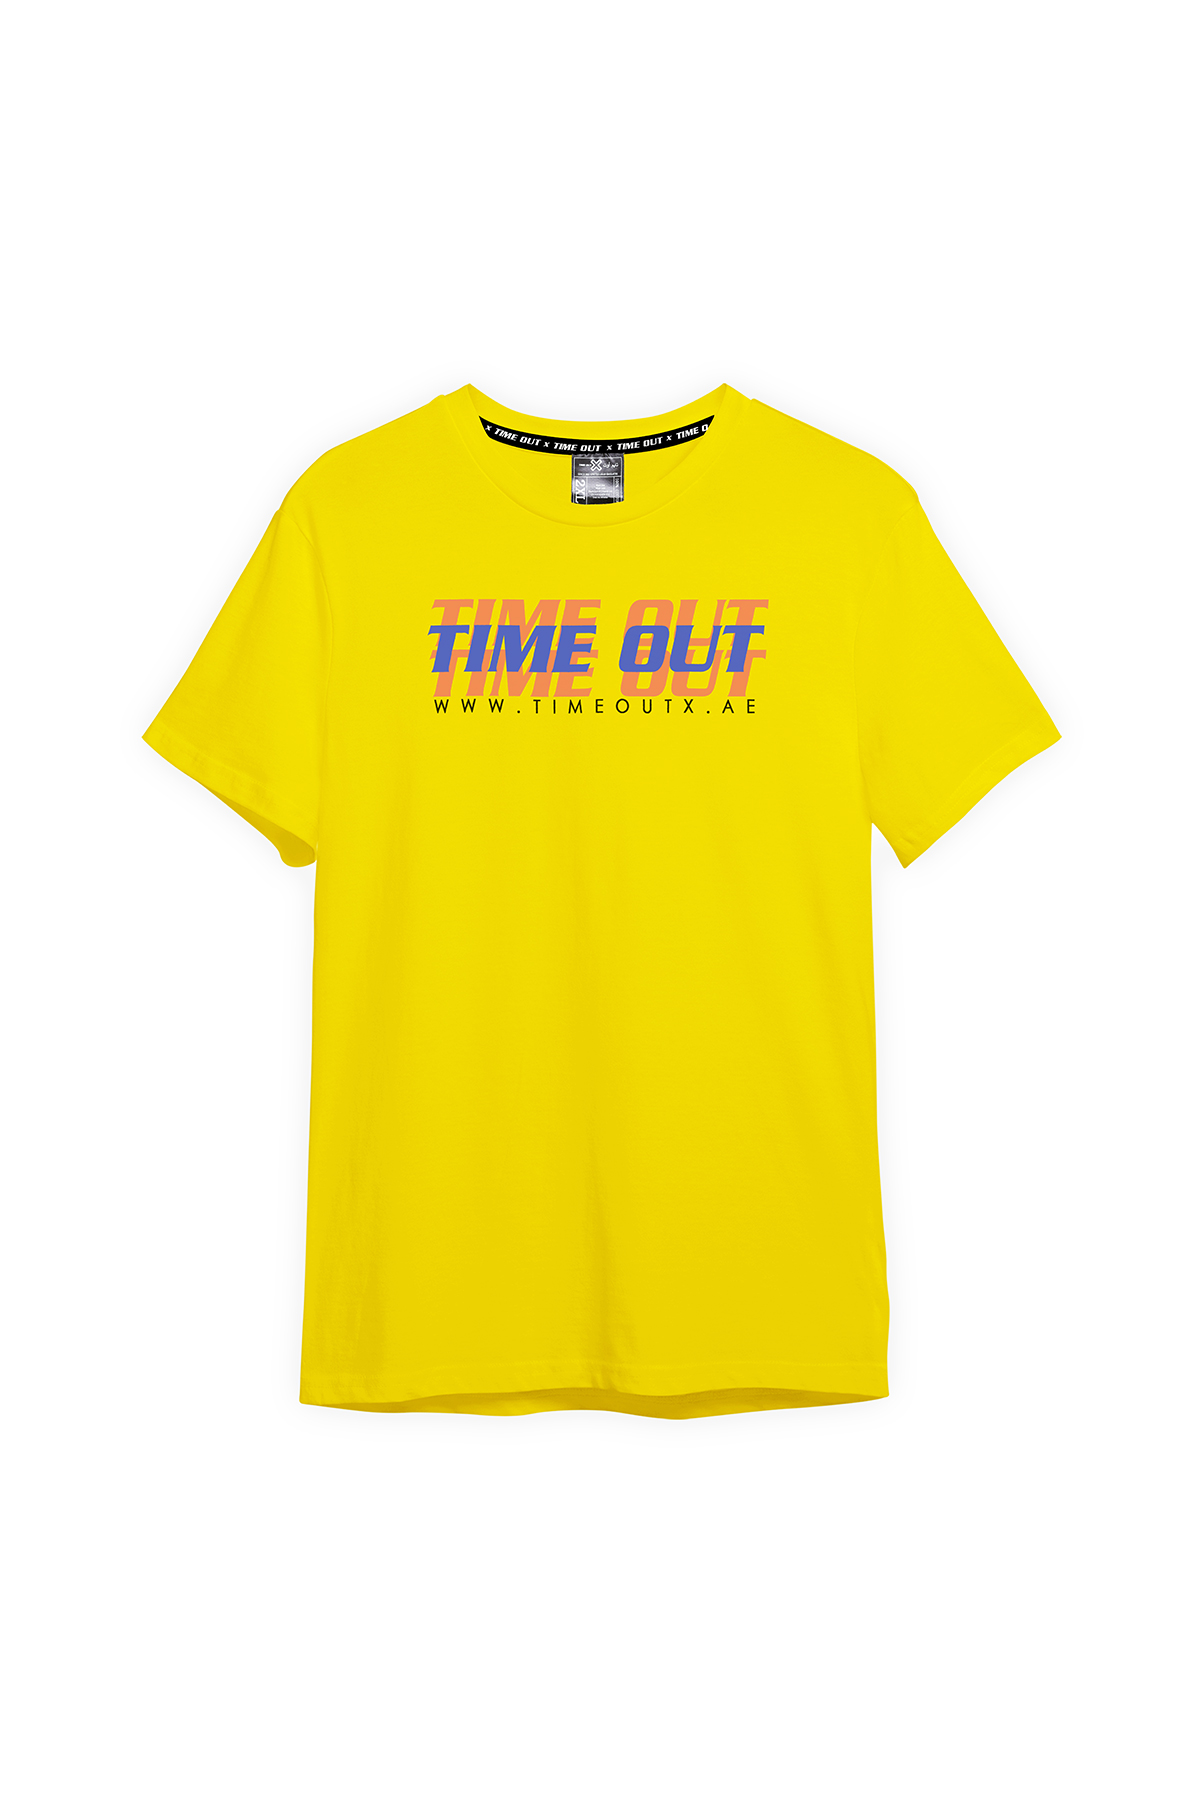 Unisex-Time-Out-X-Signature-Pure-Cotton-Yellow-Print-T-shirt-for-Kids—Back